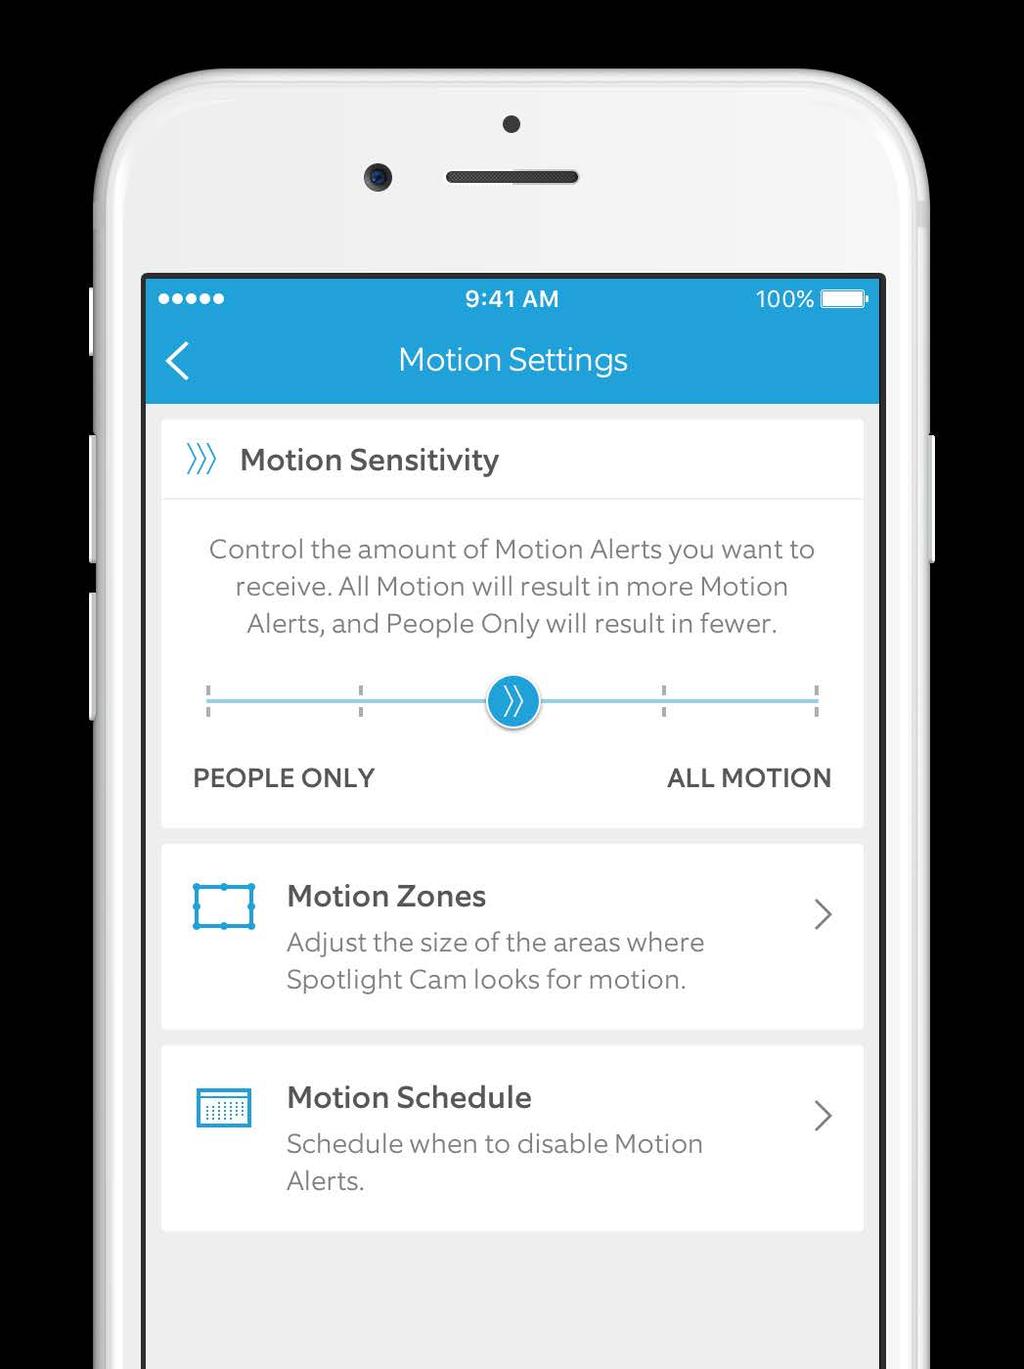 Select Motion Settings to